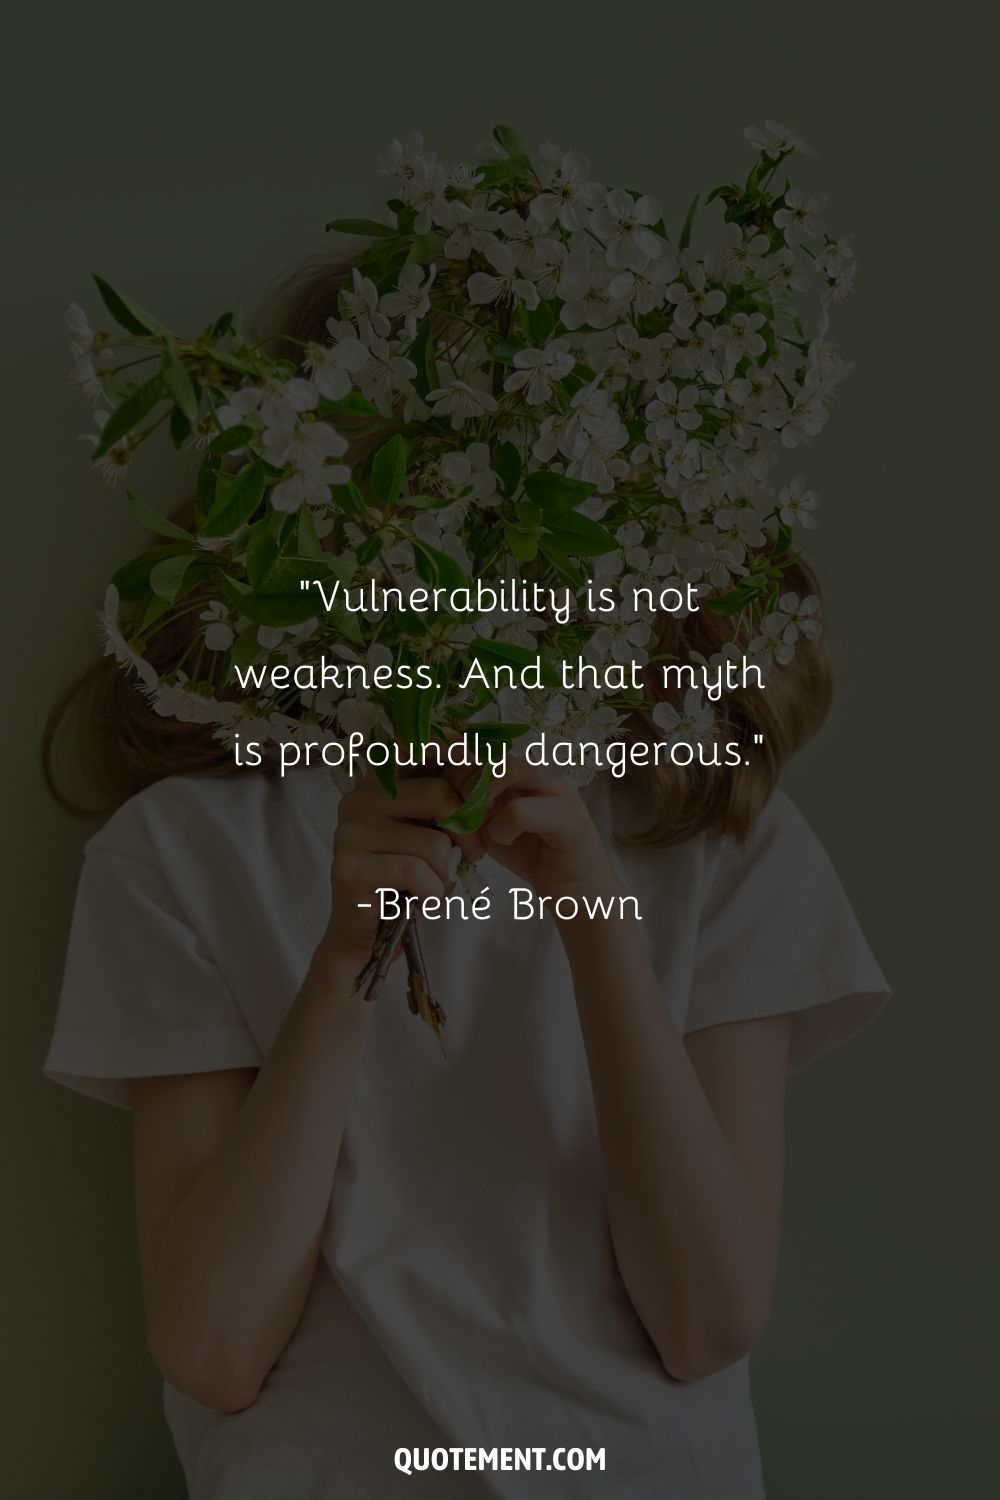 A woman obscured by white blossoms held in front of her face representing a quote about vulnerability